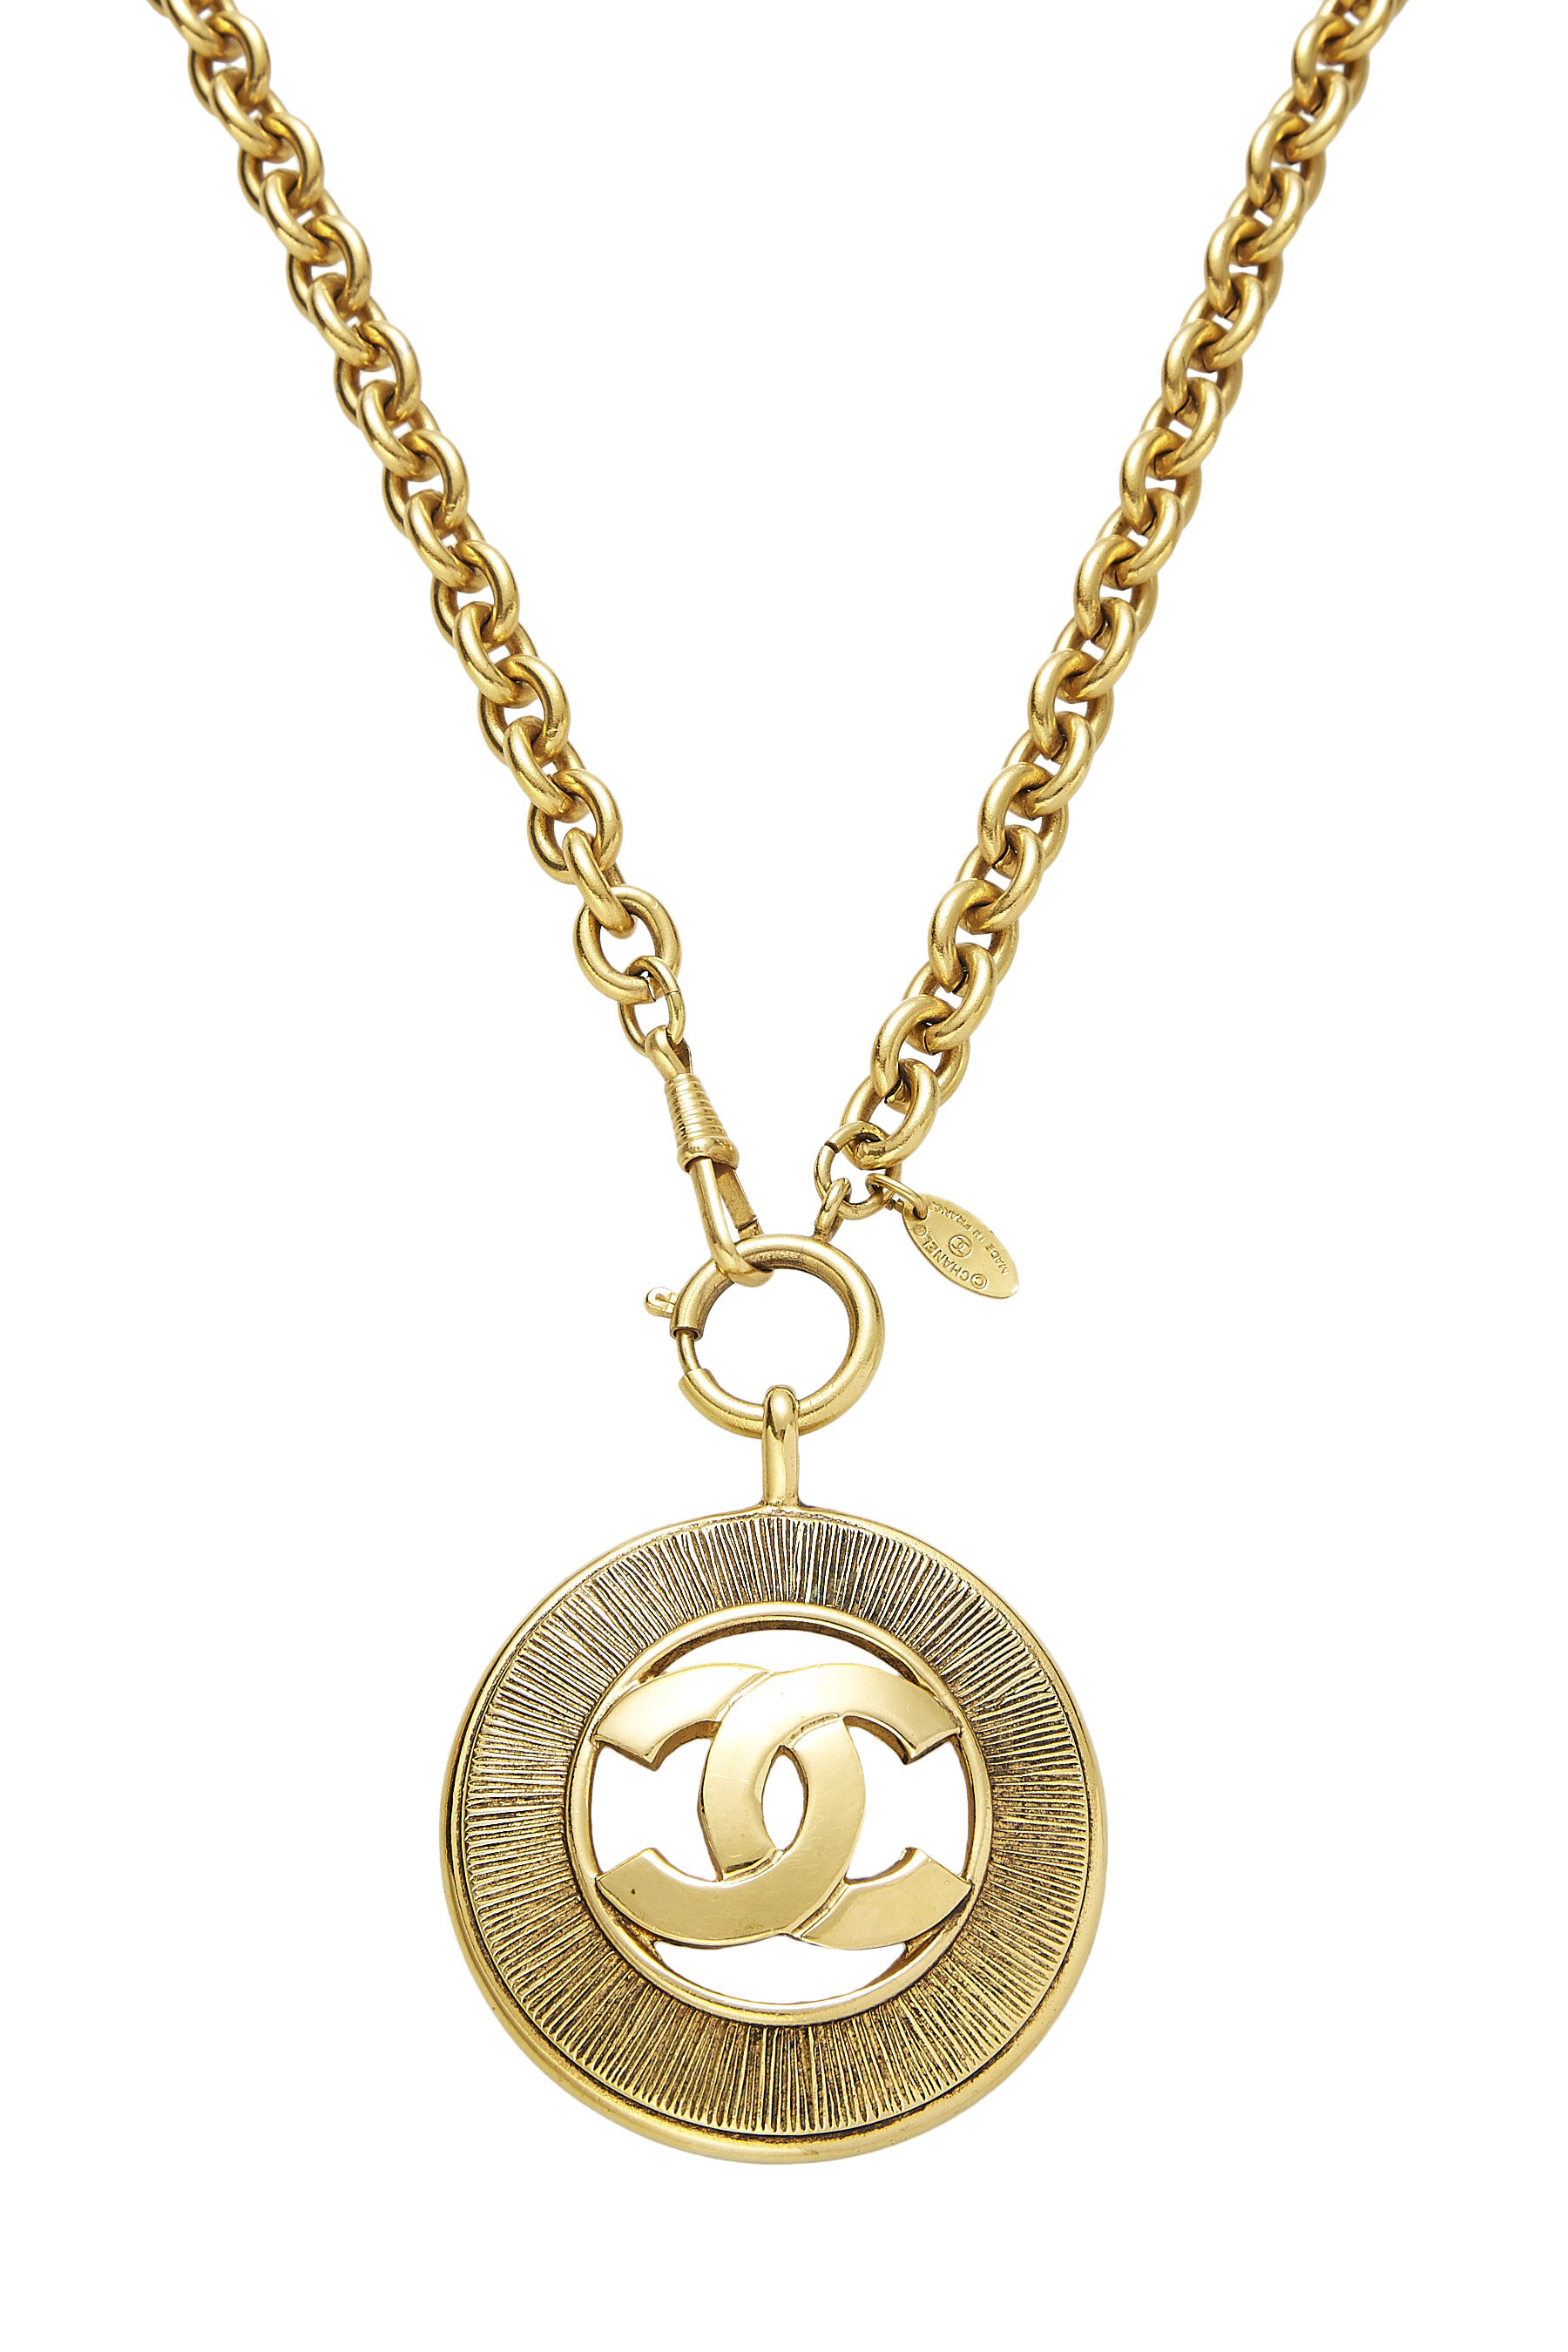 Vintage Chanel Necklace with Round CC Pendant